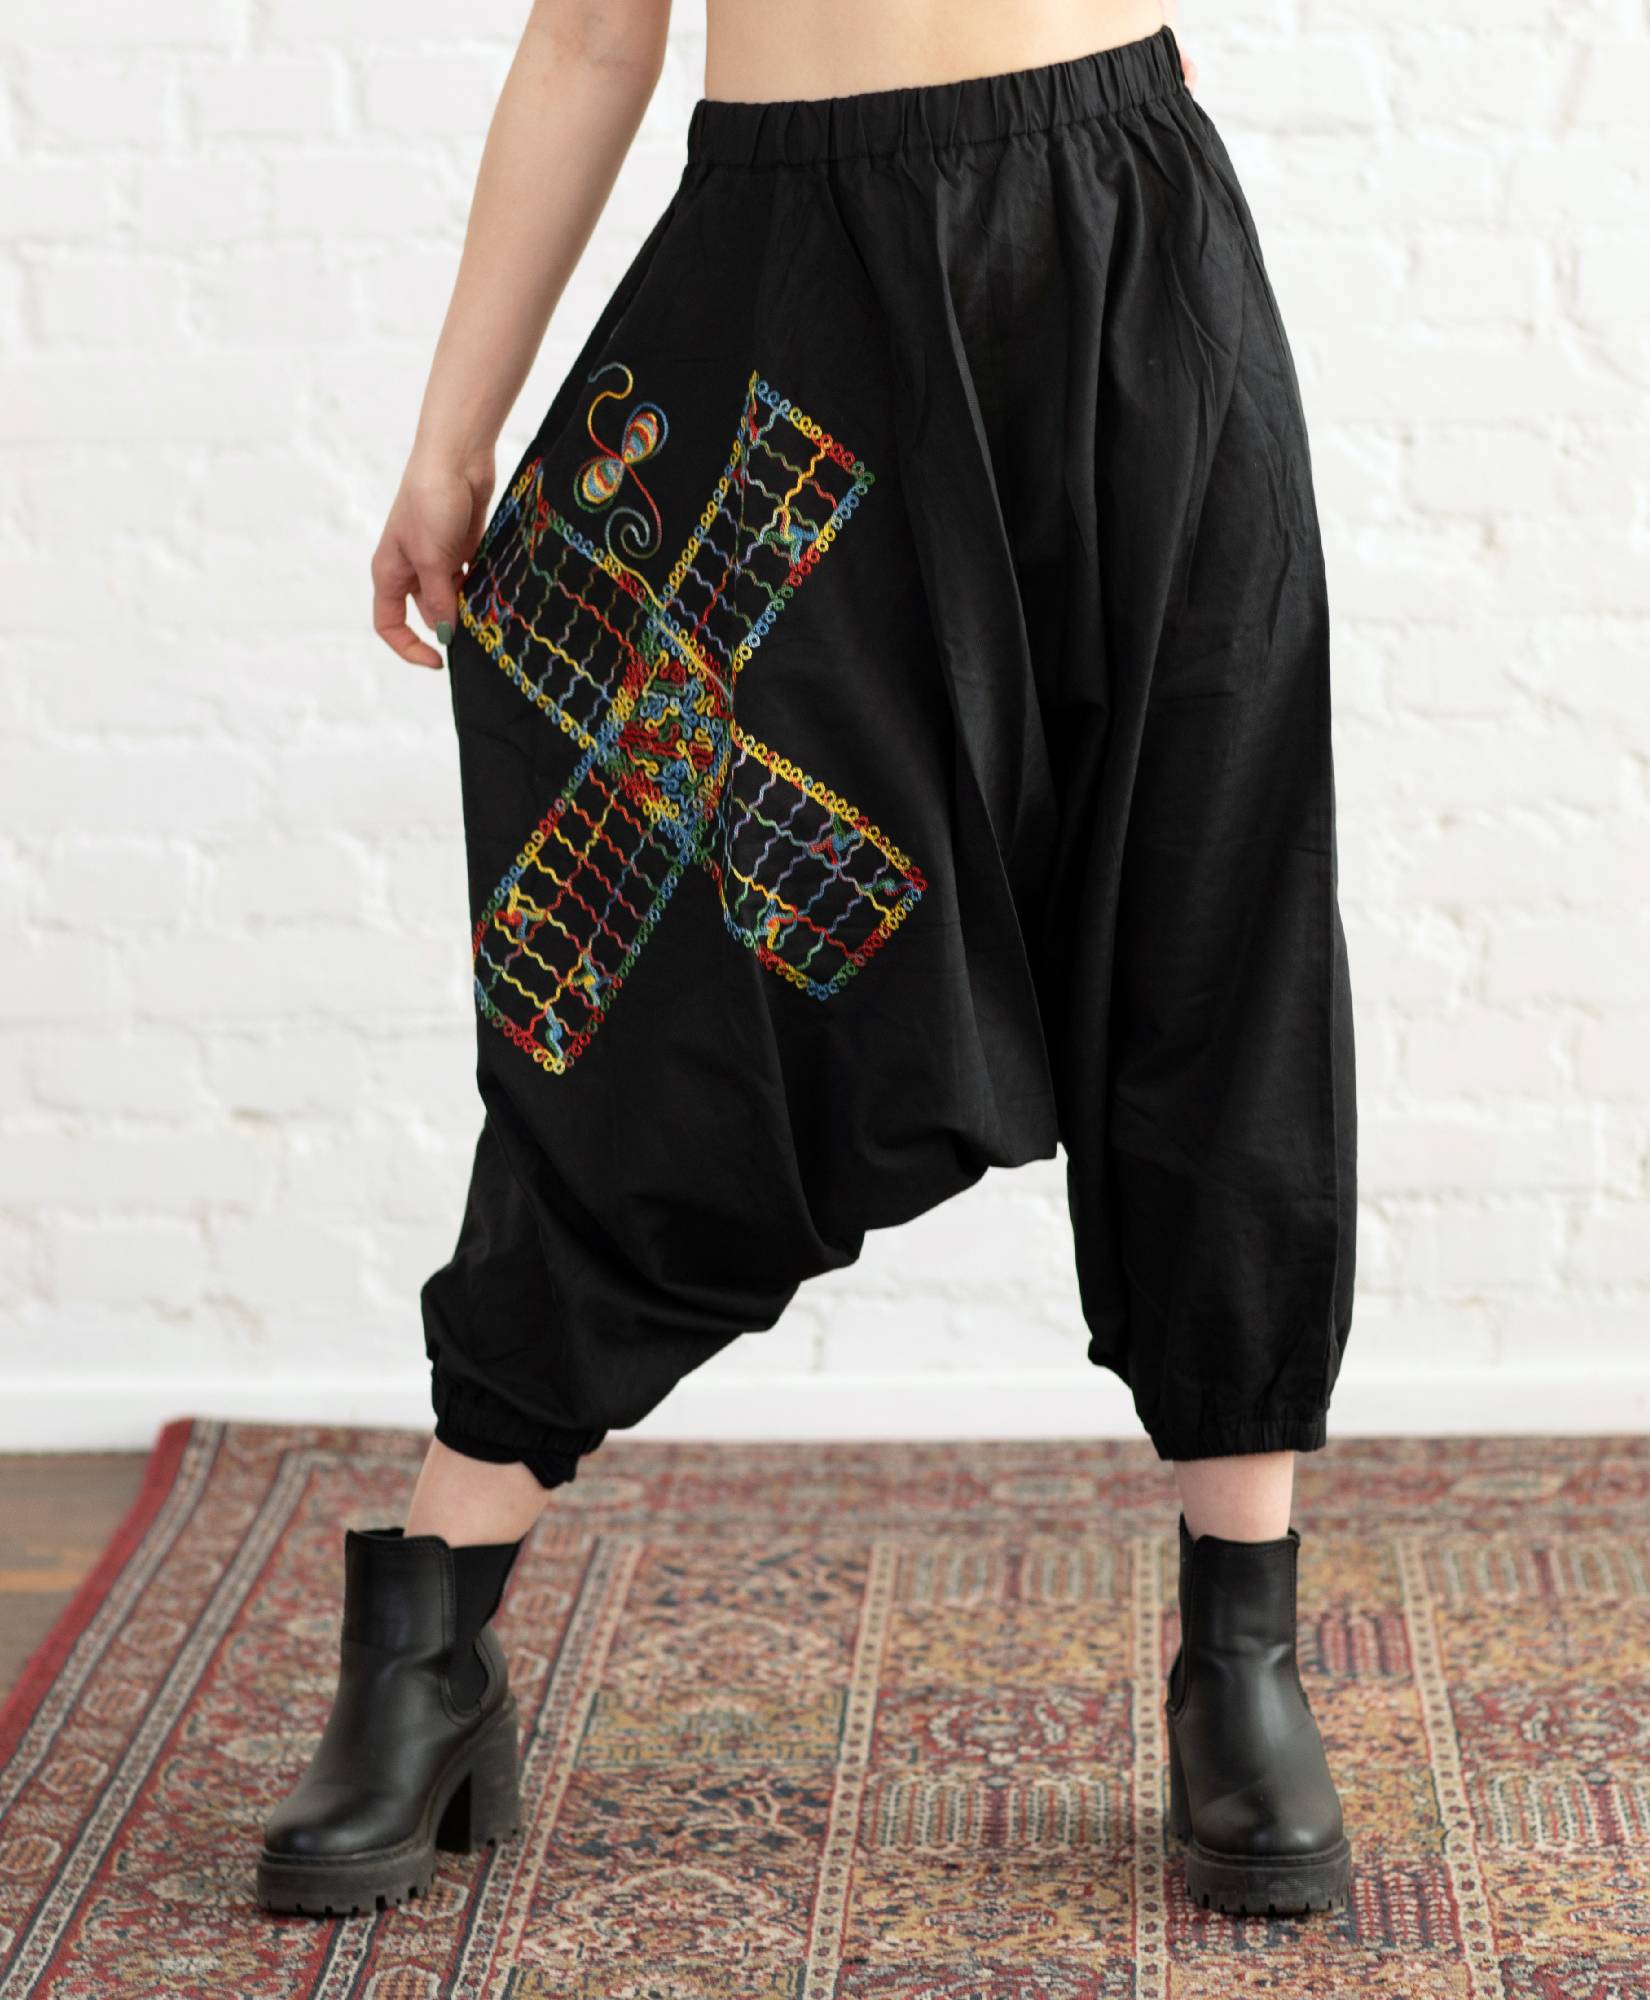 Cotton Black Embroidered Harem Pants + Traditional Barjees Board Game / Stitched Sarouel